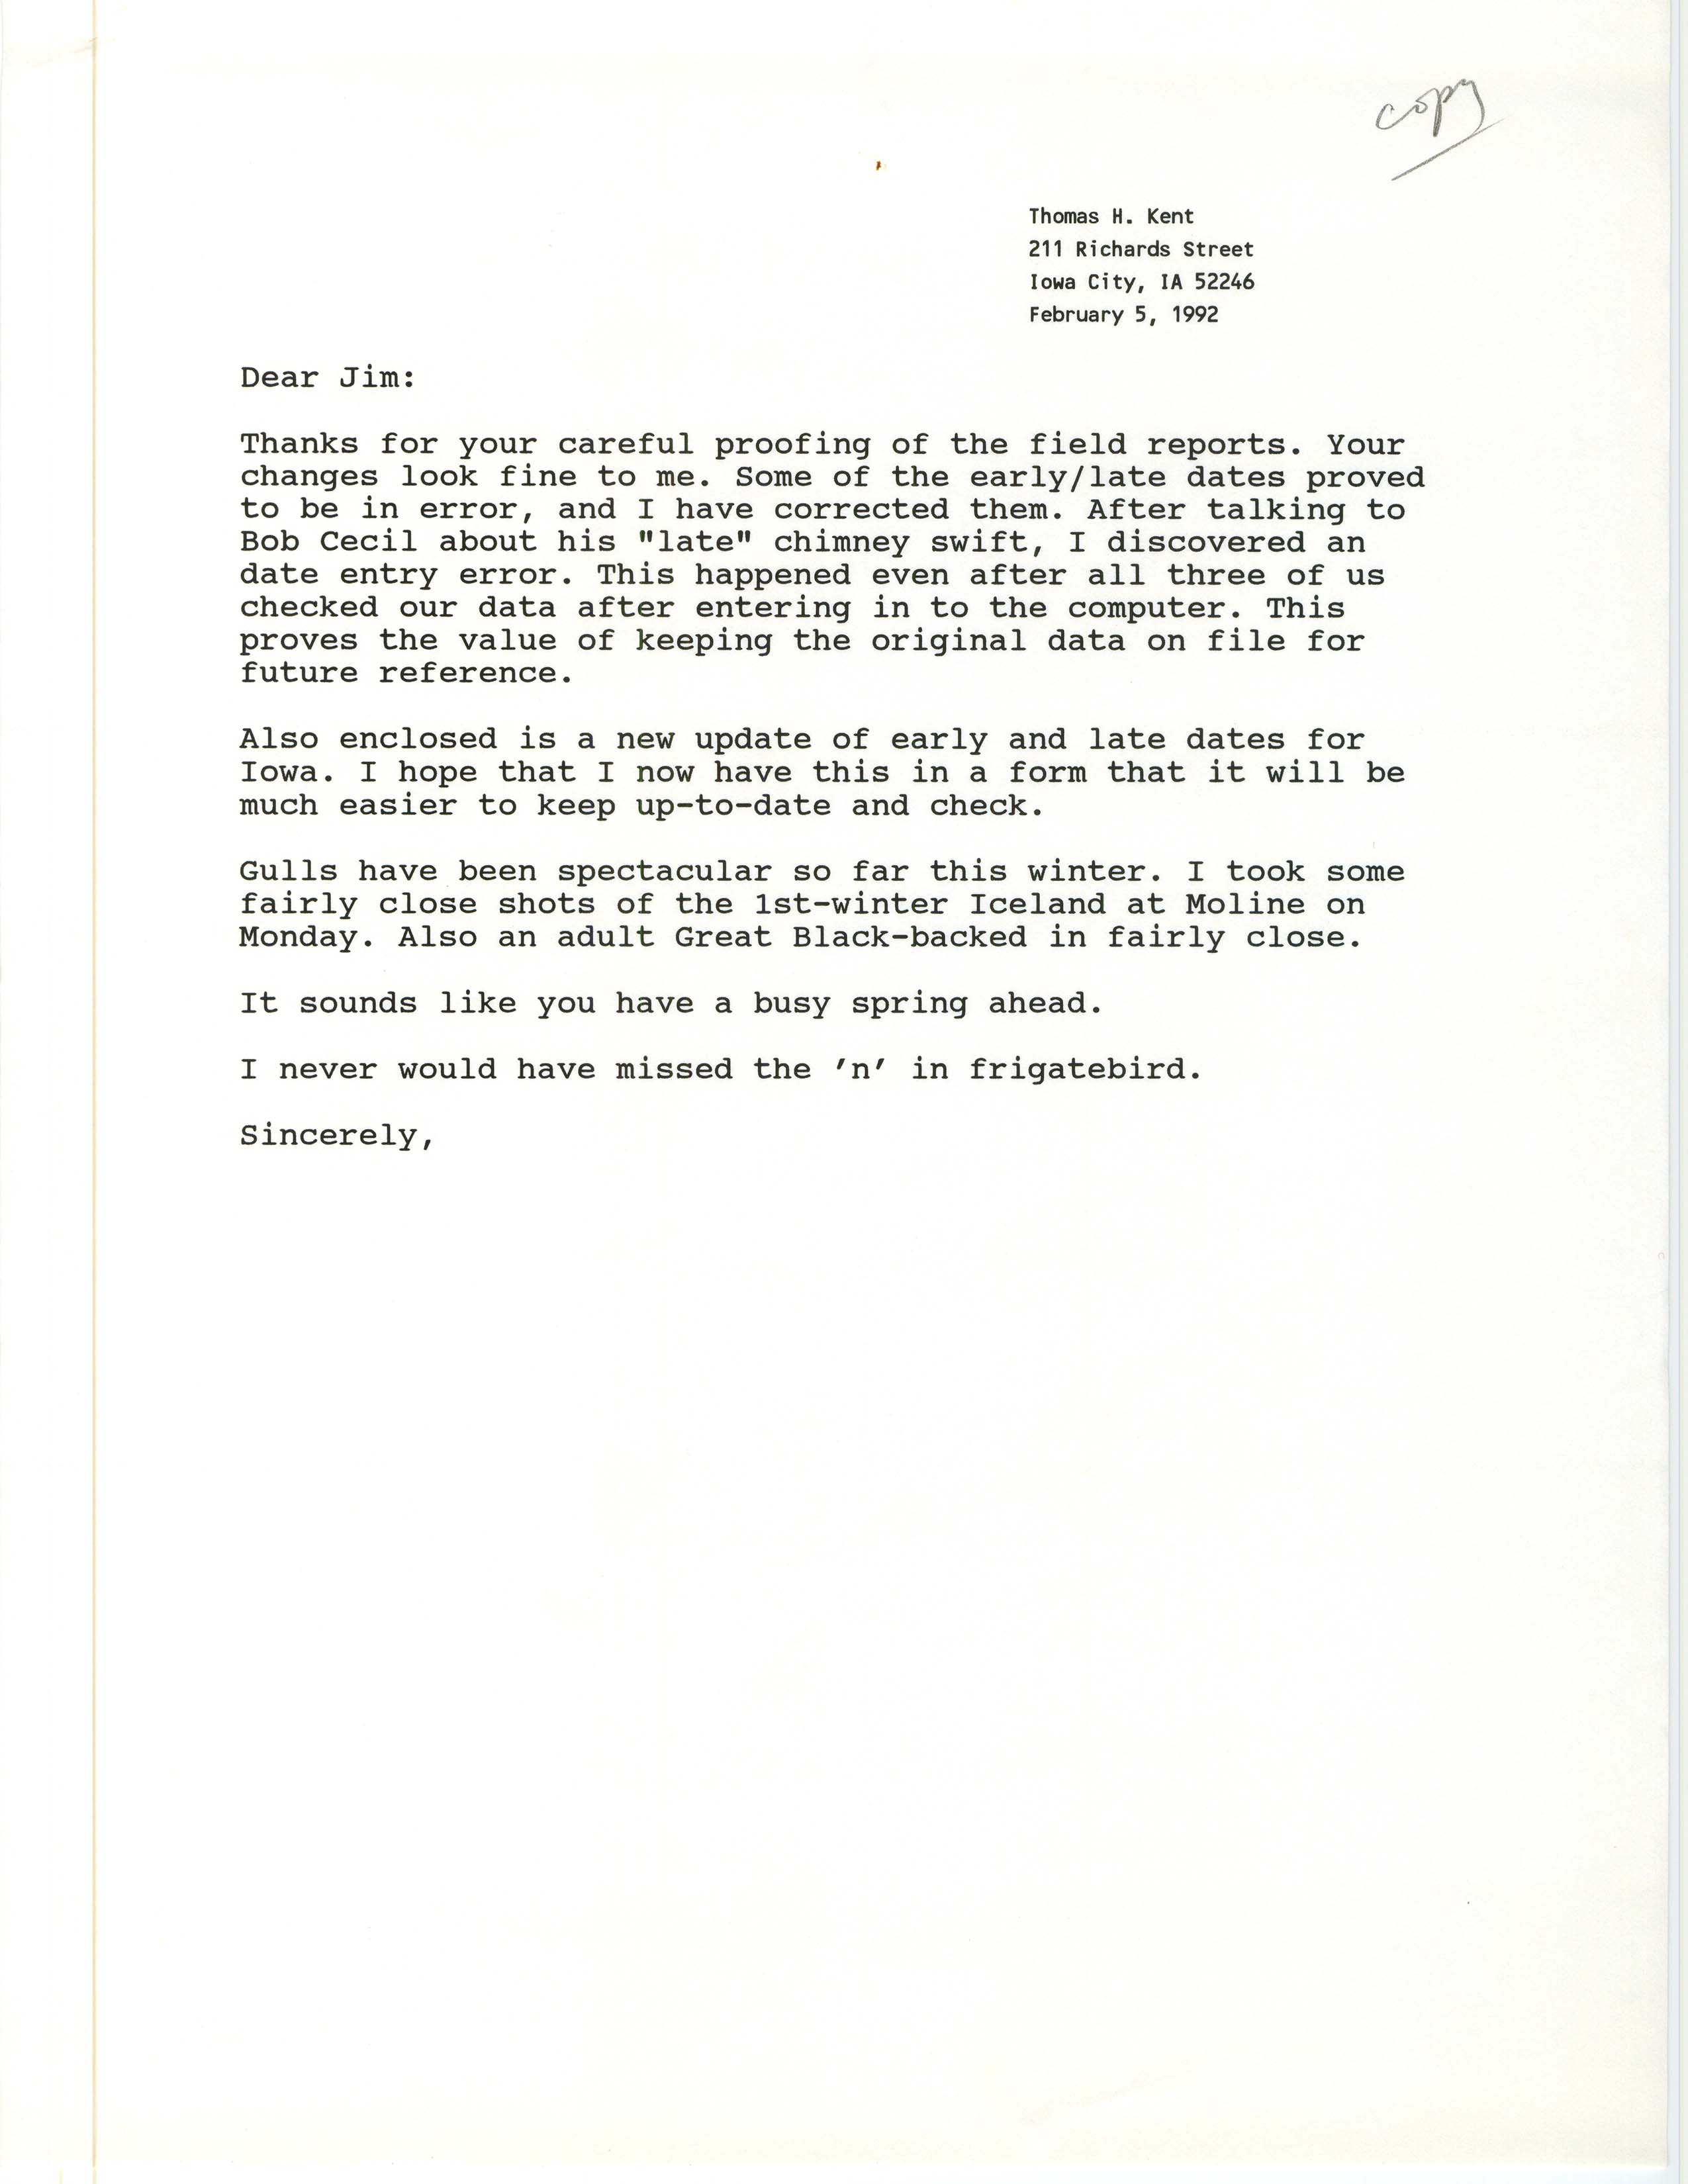 Thomas H. Kent letter to James L. Fuller regarding editing the field reports, February 5, 1992